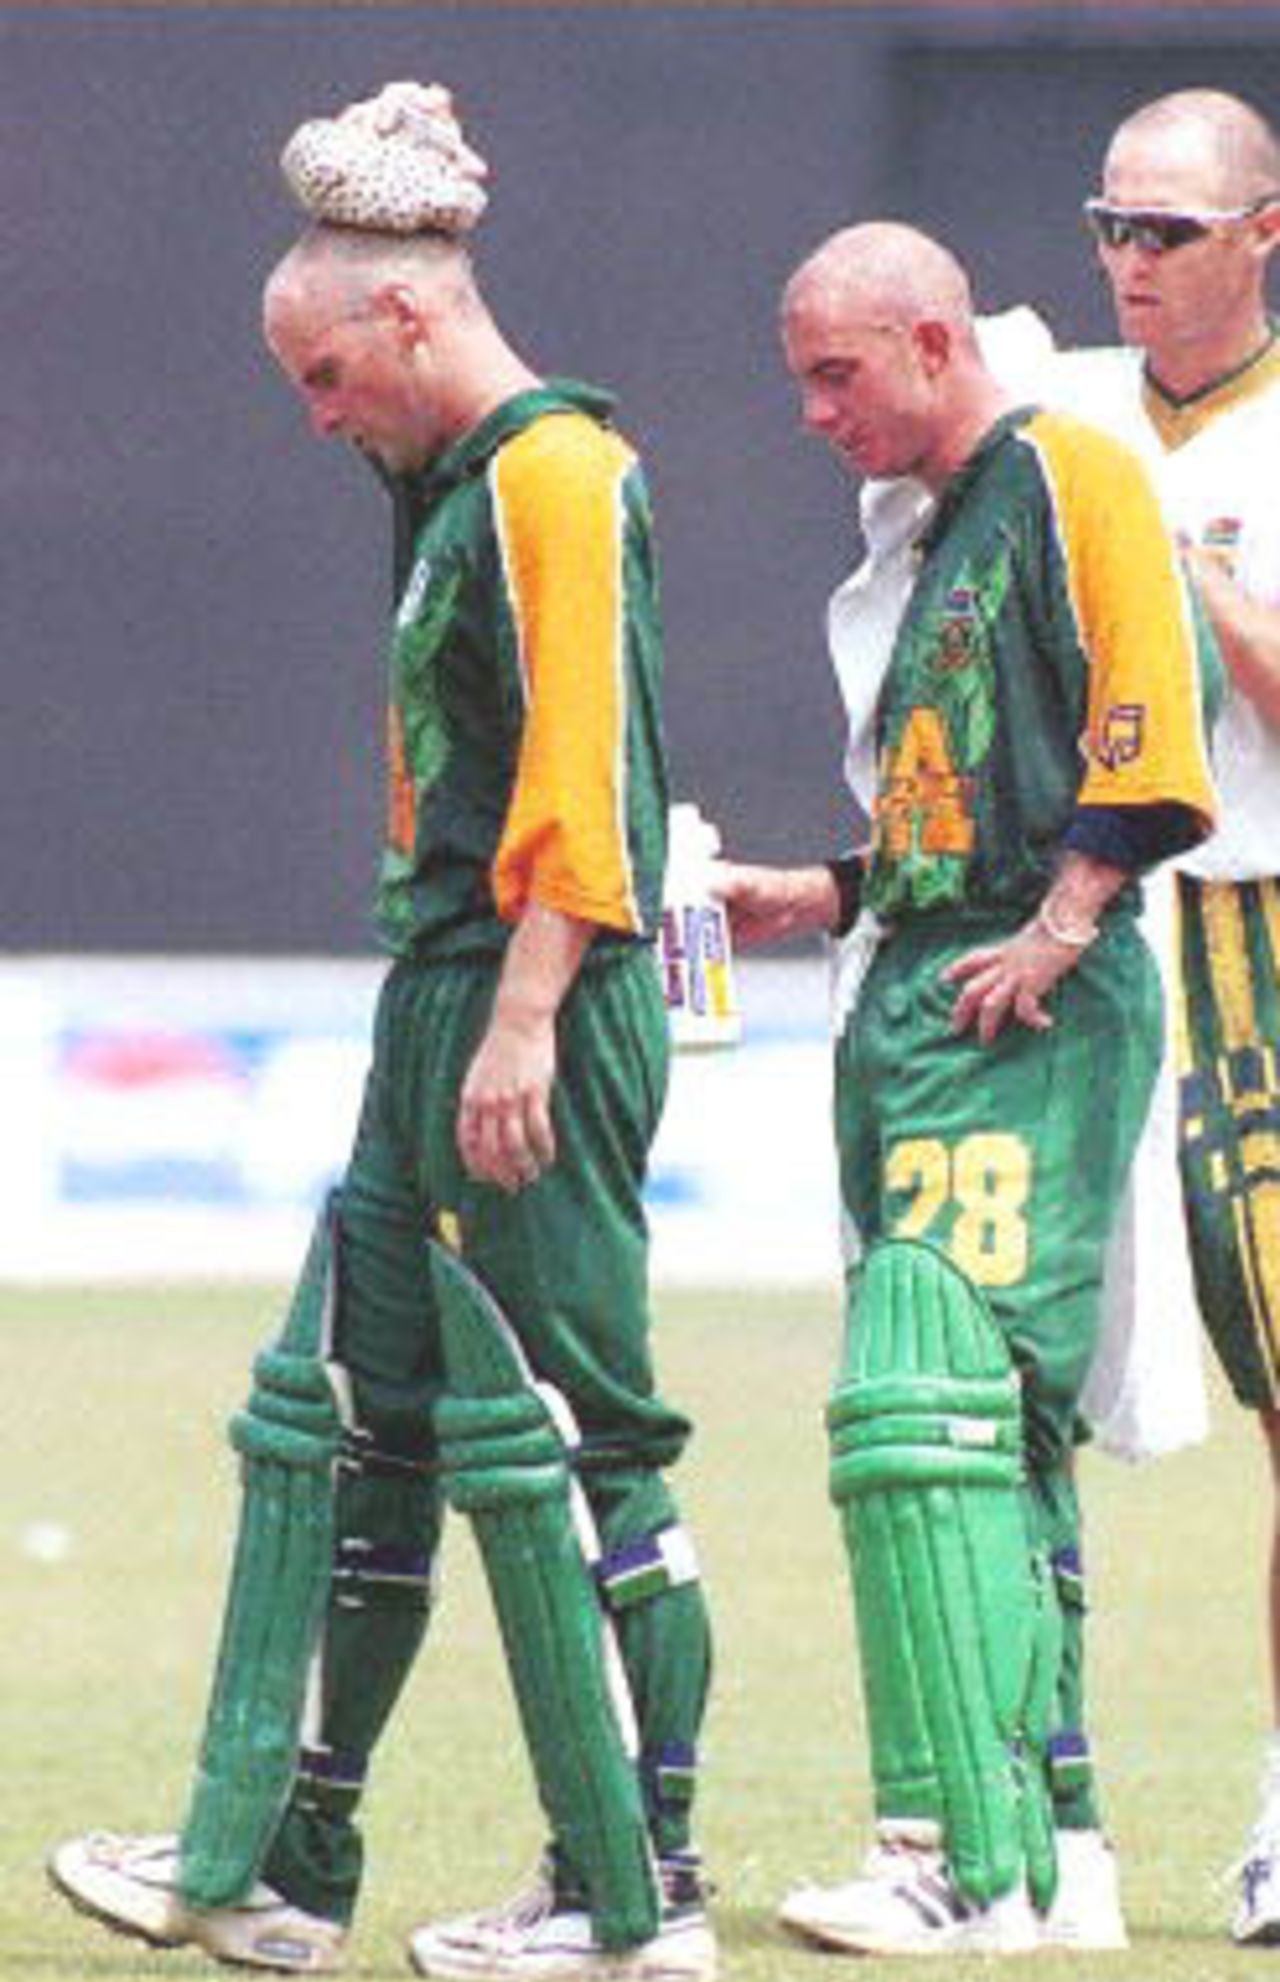 South African batsman Gary Kirsten (L) puts an ice pack on his head as the team physiotherapist attends to team-mate Herschelle Gibbs (C) during the drink's break in the first one-day international cricket match between India and South Africa in Cochin 09 March 2000. Despite centuries from openers Kirsten and Gibbs India went onto win the match by 3 wickets